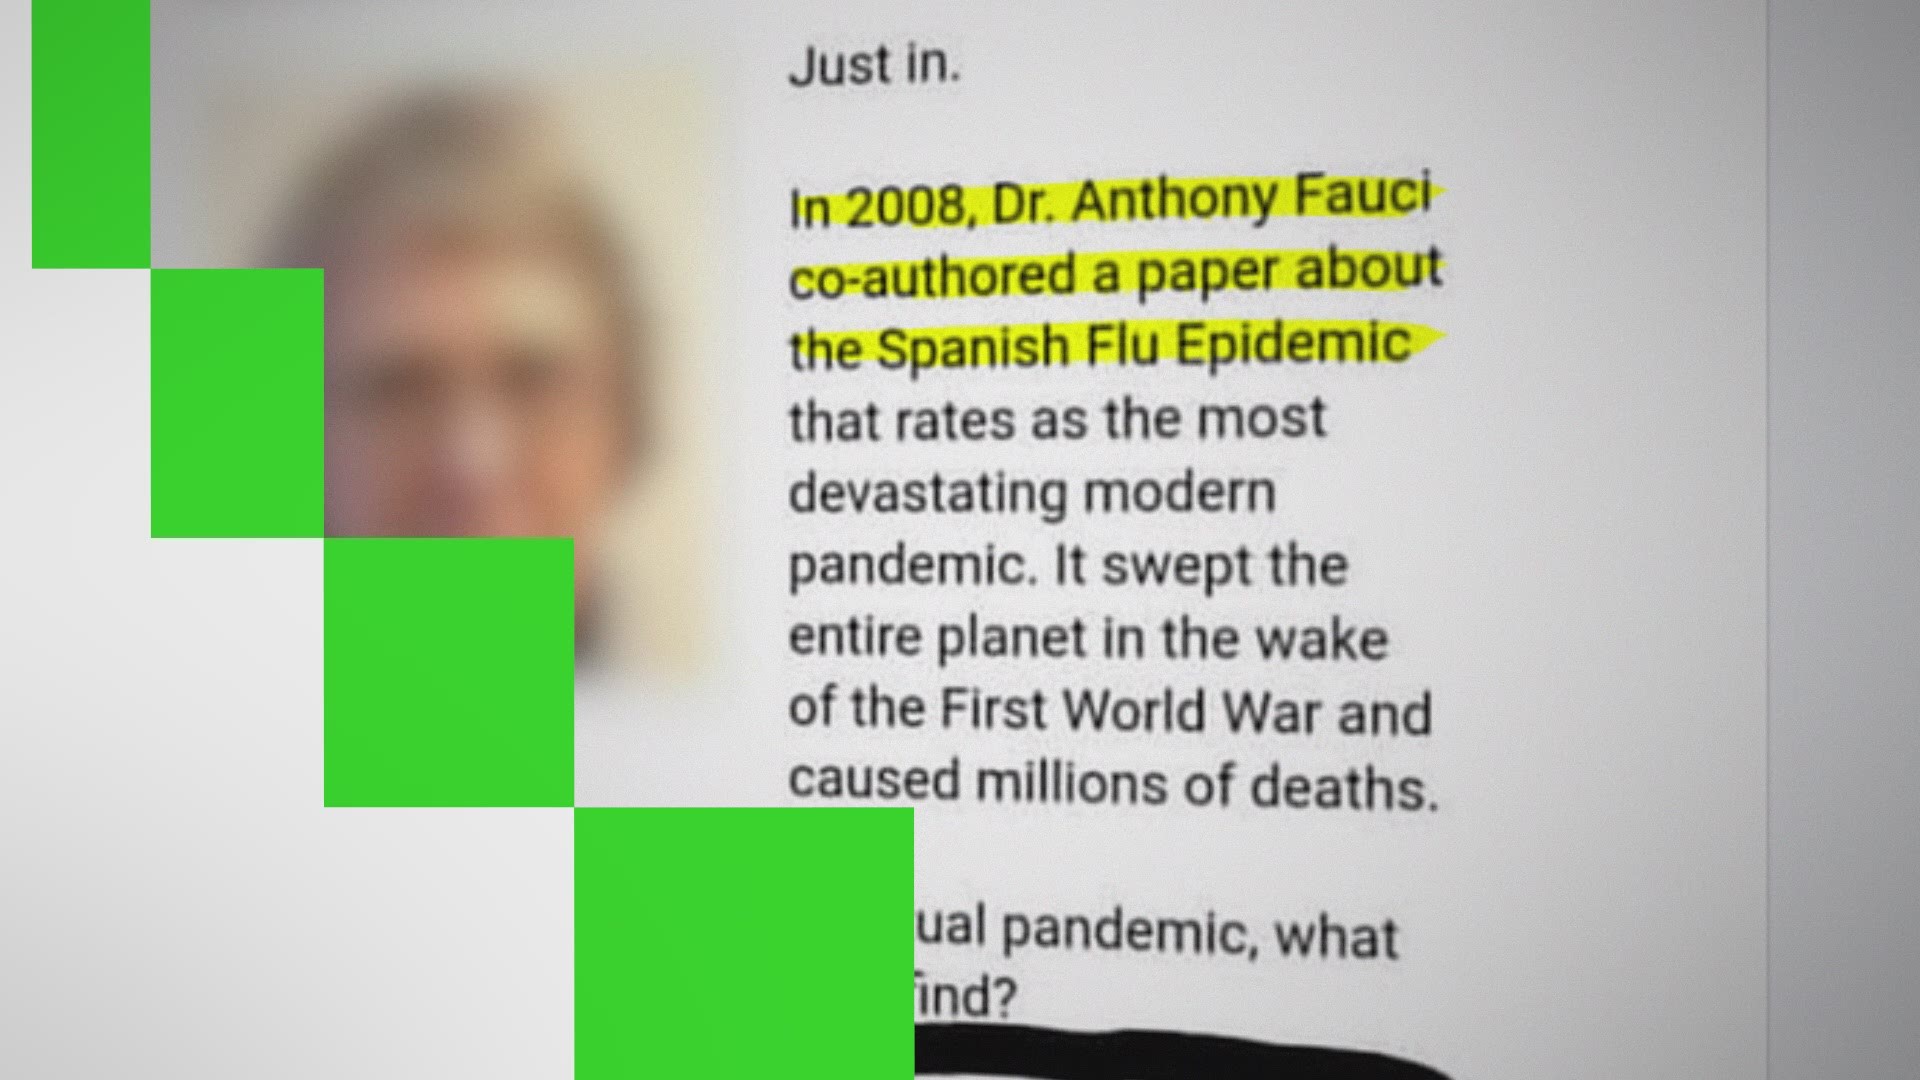 Claims that Dr. Fauci published a study linking bacterial pneumonia in the 1918 flu pandemic to people wearing masks--are FALSE.